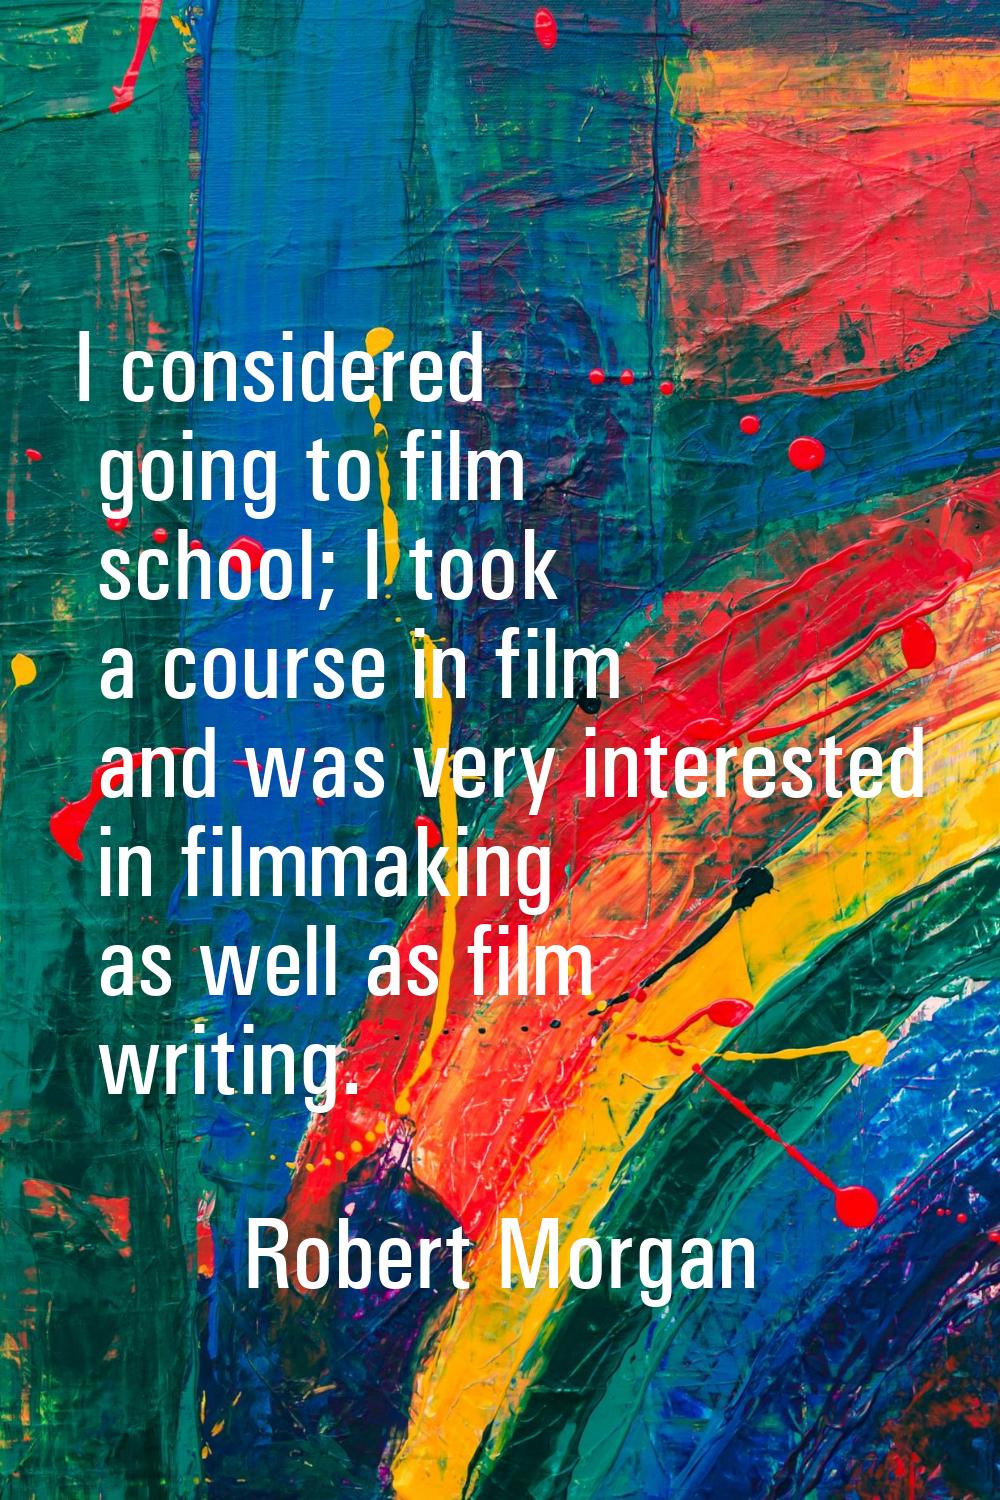 I considered going to film school; I took a course in film and was very interested in filmmaking as